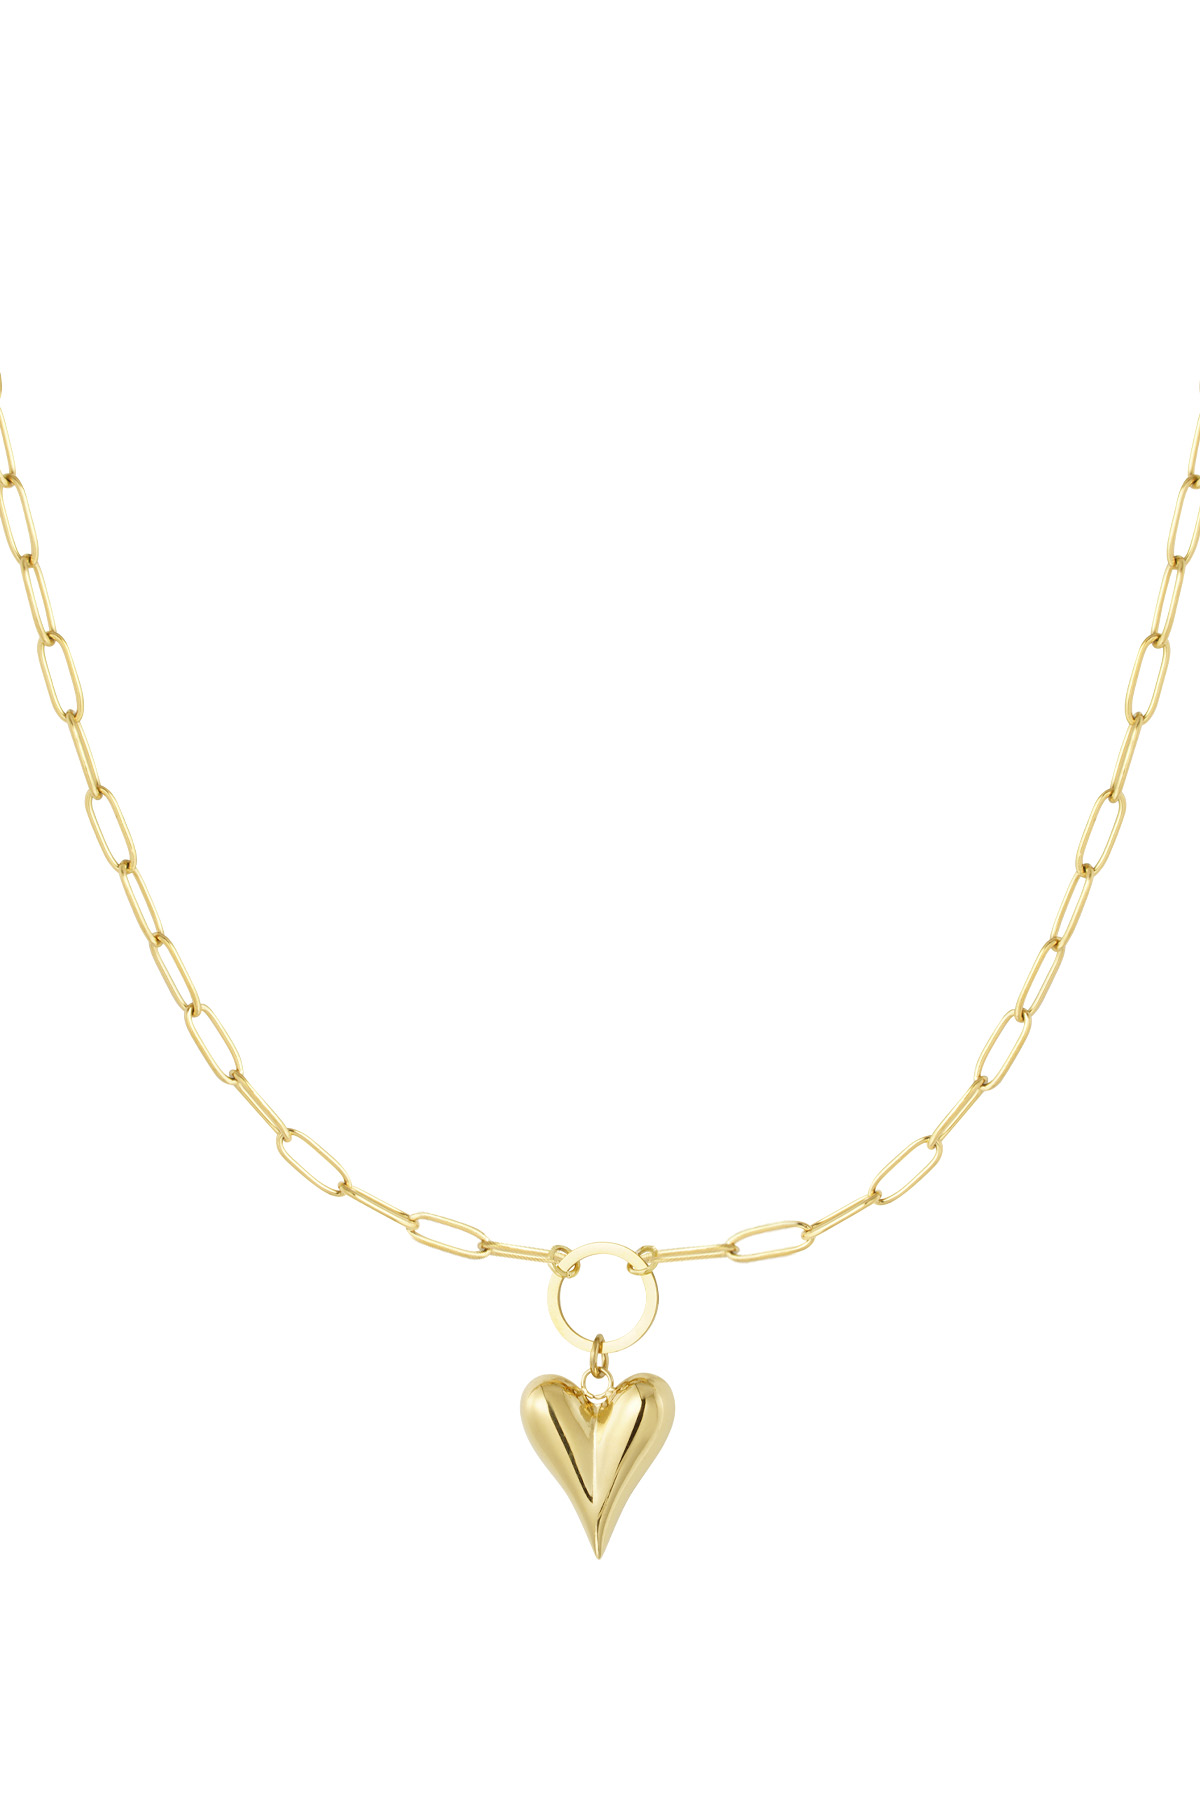 Linked necklace with heart - gold